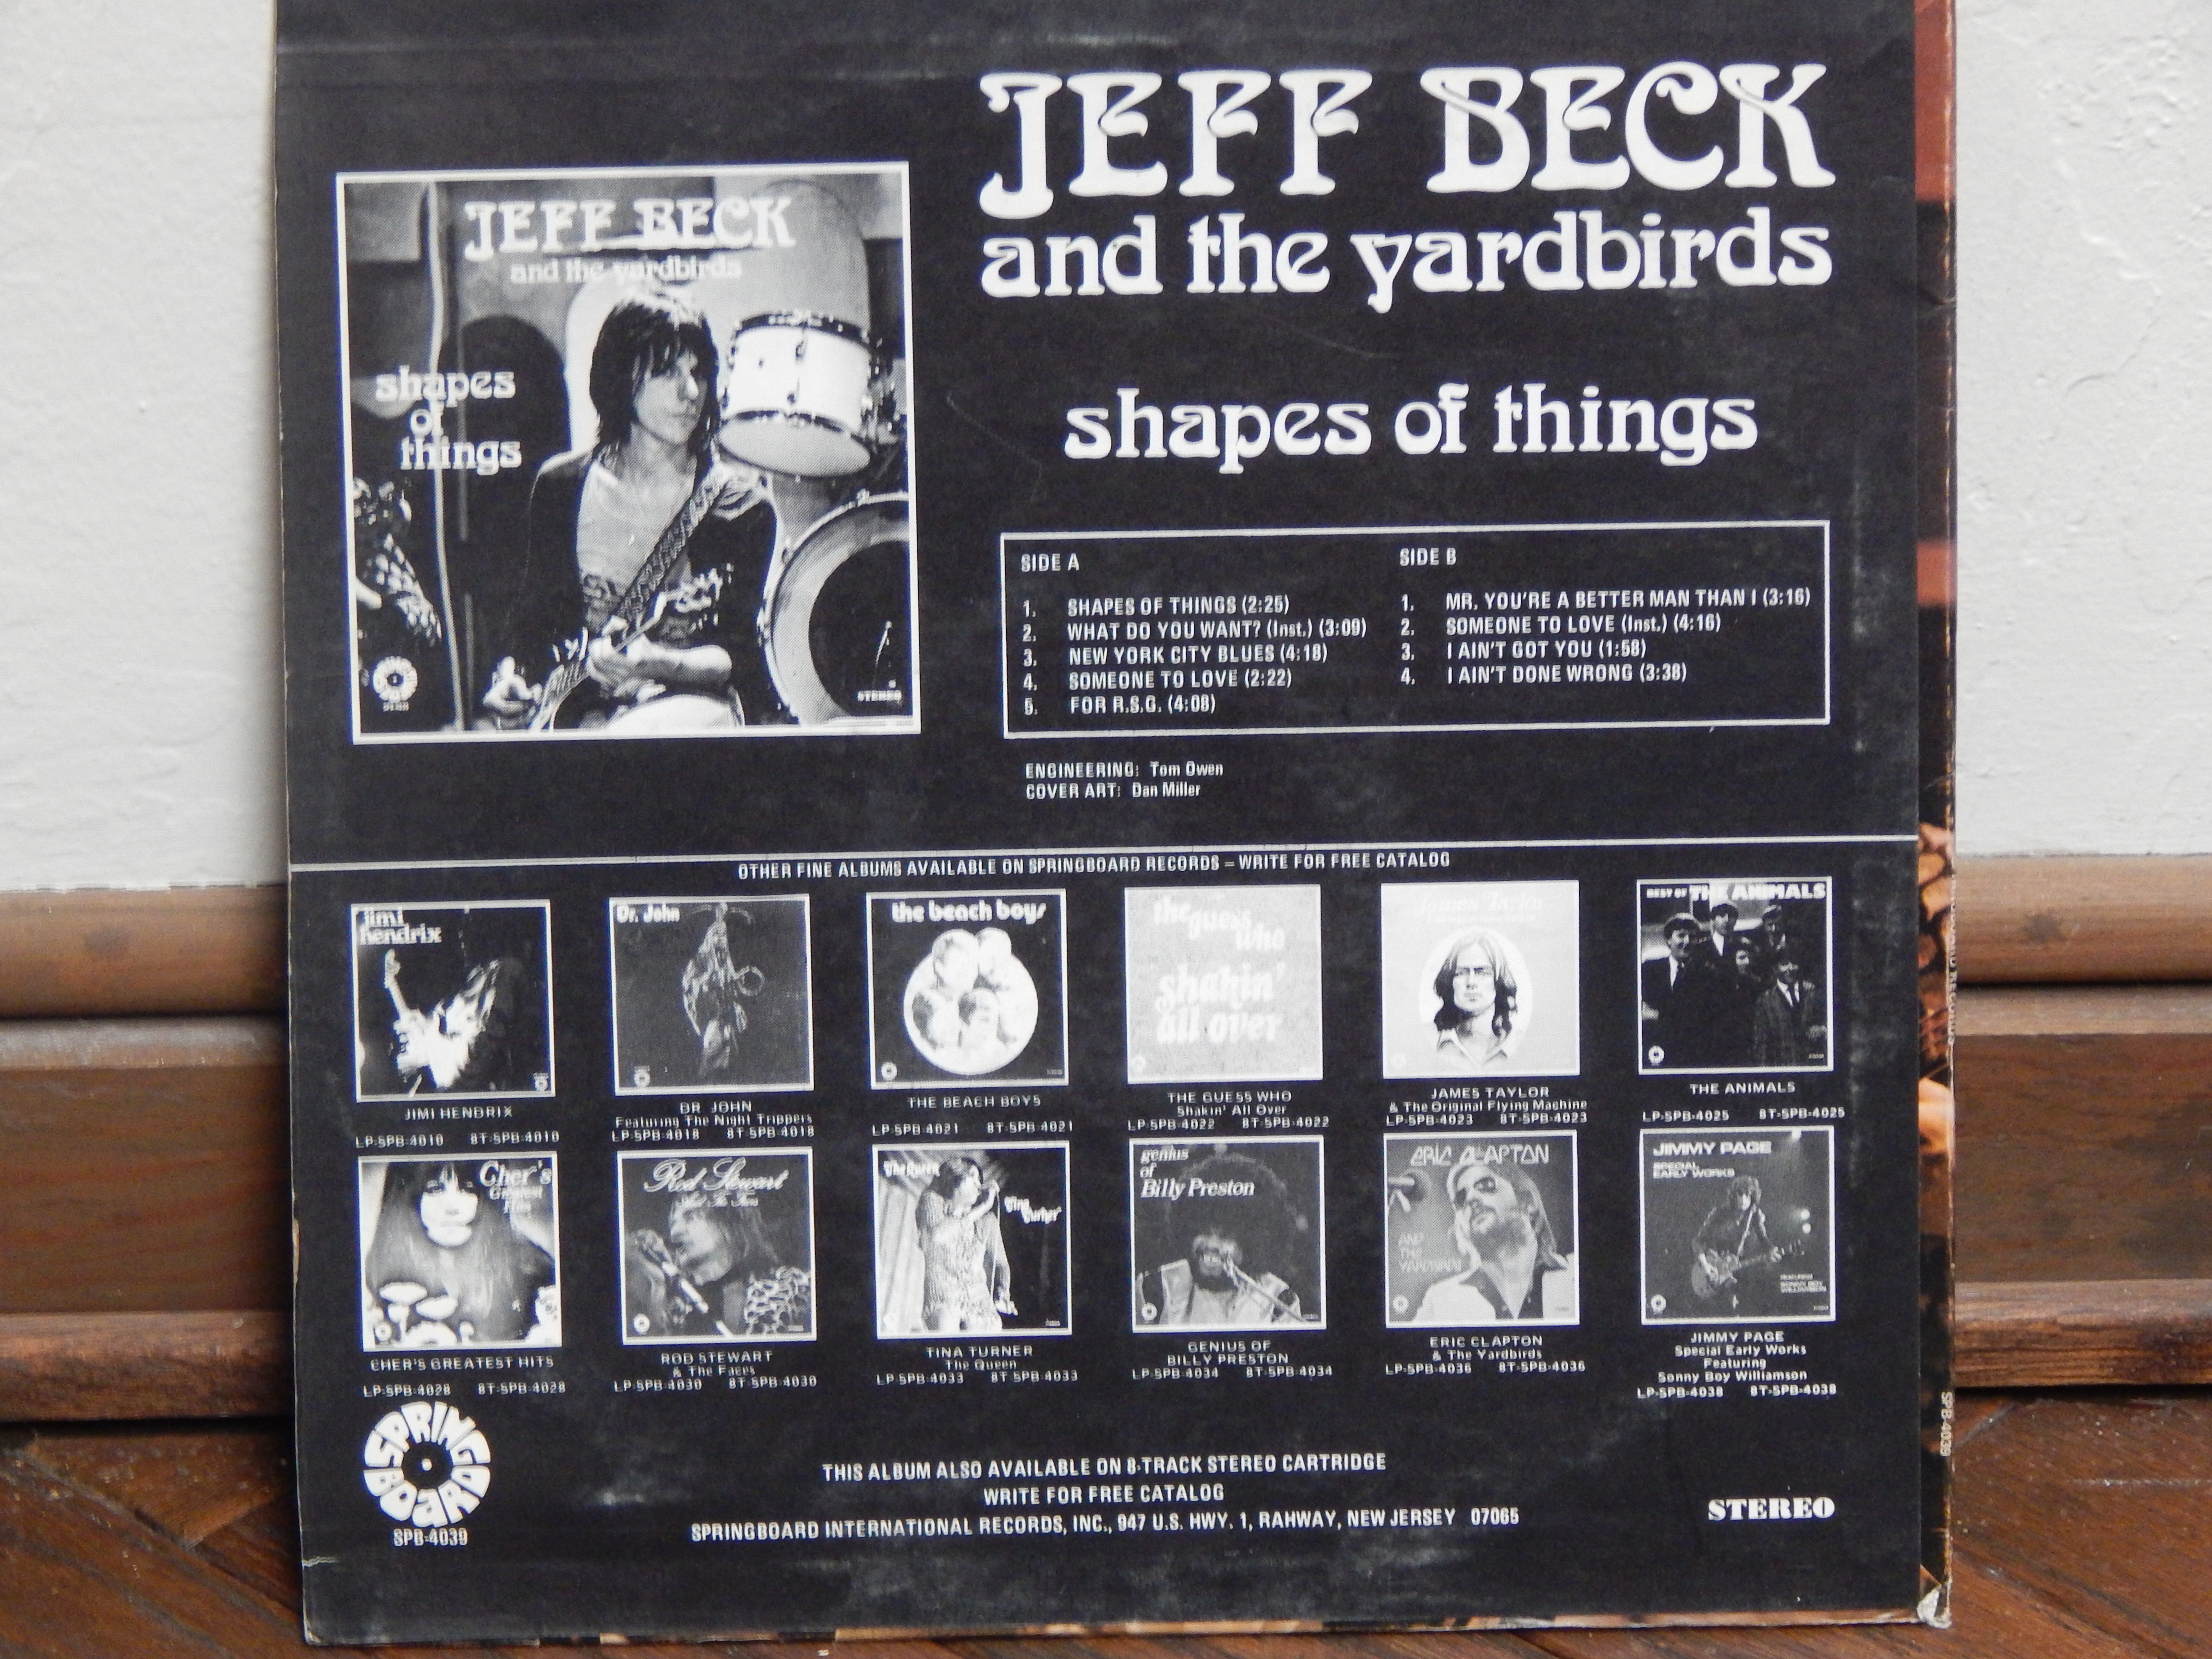 The yardbirds shapes of things other recordings of this song Jeff Beck And The Yardbirds Shapes Of Things